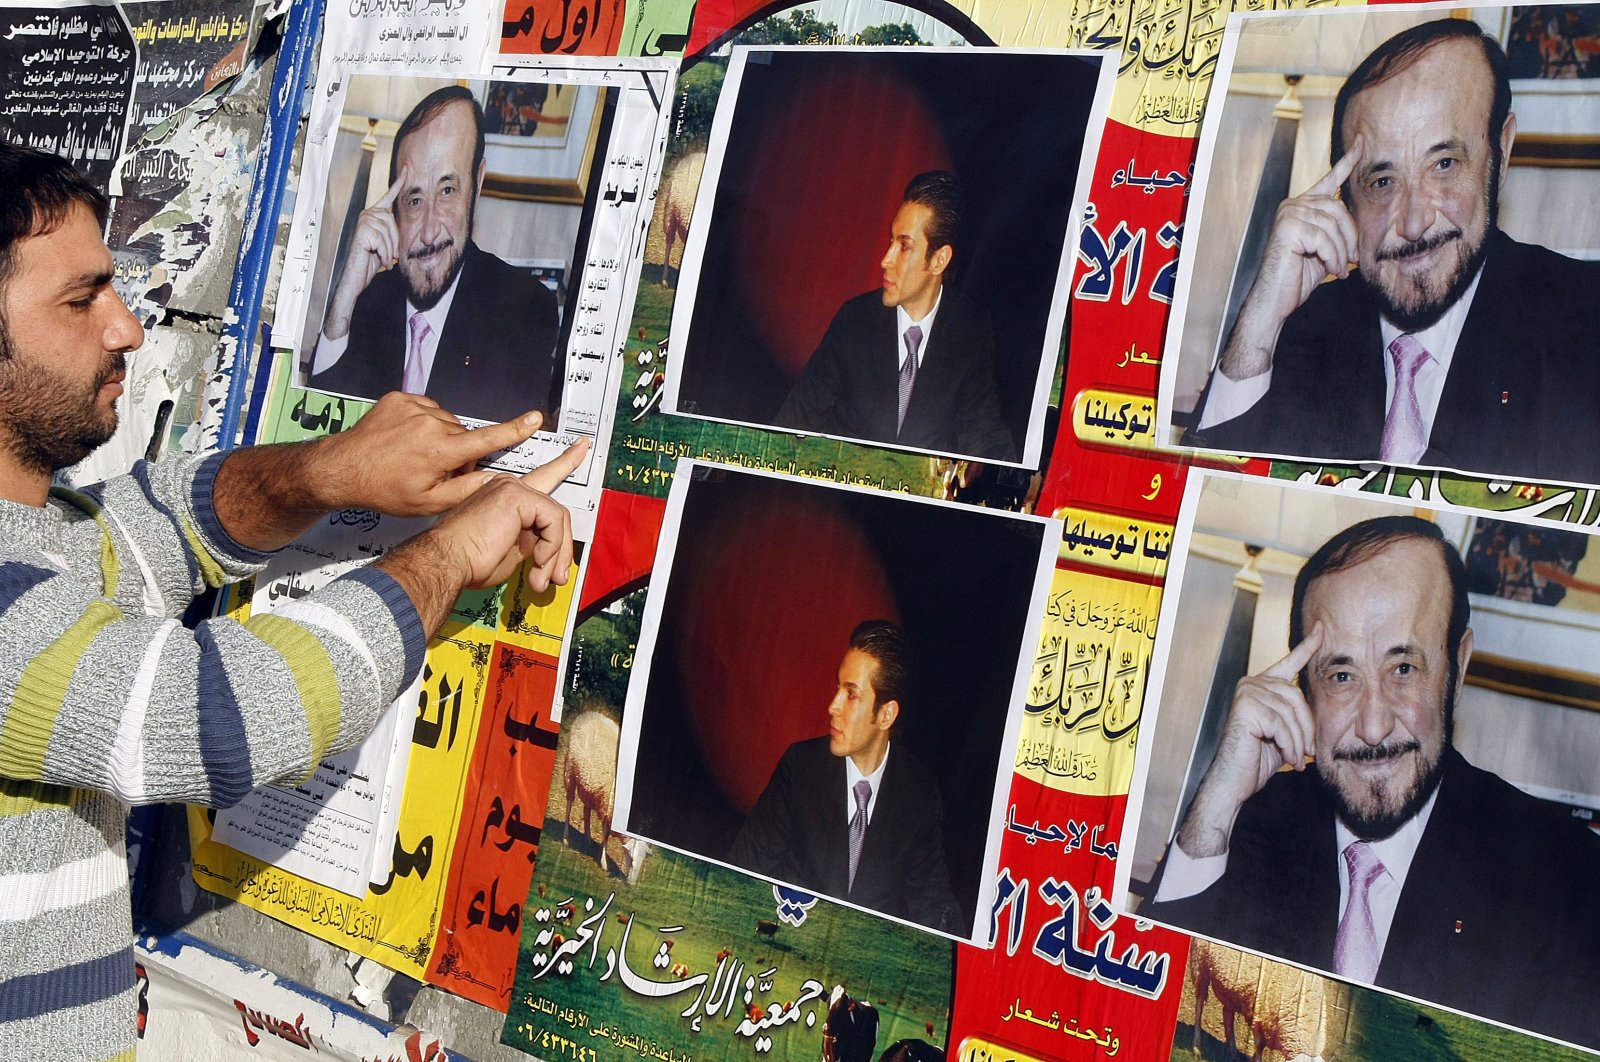 A man pastes pictures of Rifaat Assad (R), the younger brother of late Syrian President Hafez Assad and uncle of Bashar Assad, and Rifaat Assad's son Ribal on a wall in the northern city of Tripoli, Lebanon, Dec. 6, 2007. (AFP Photo)